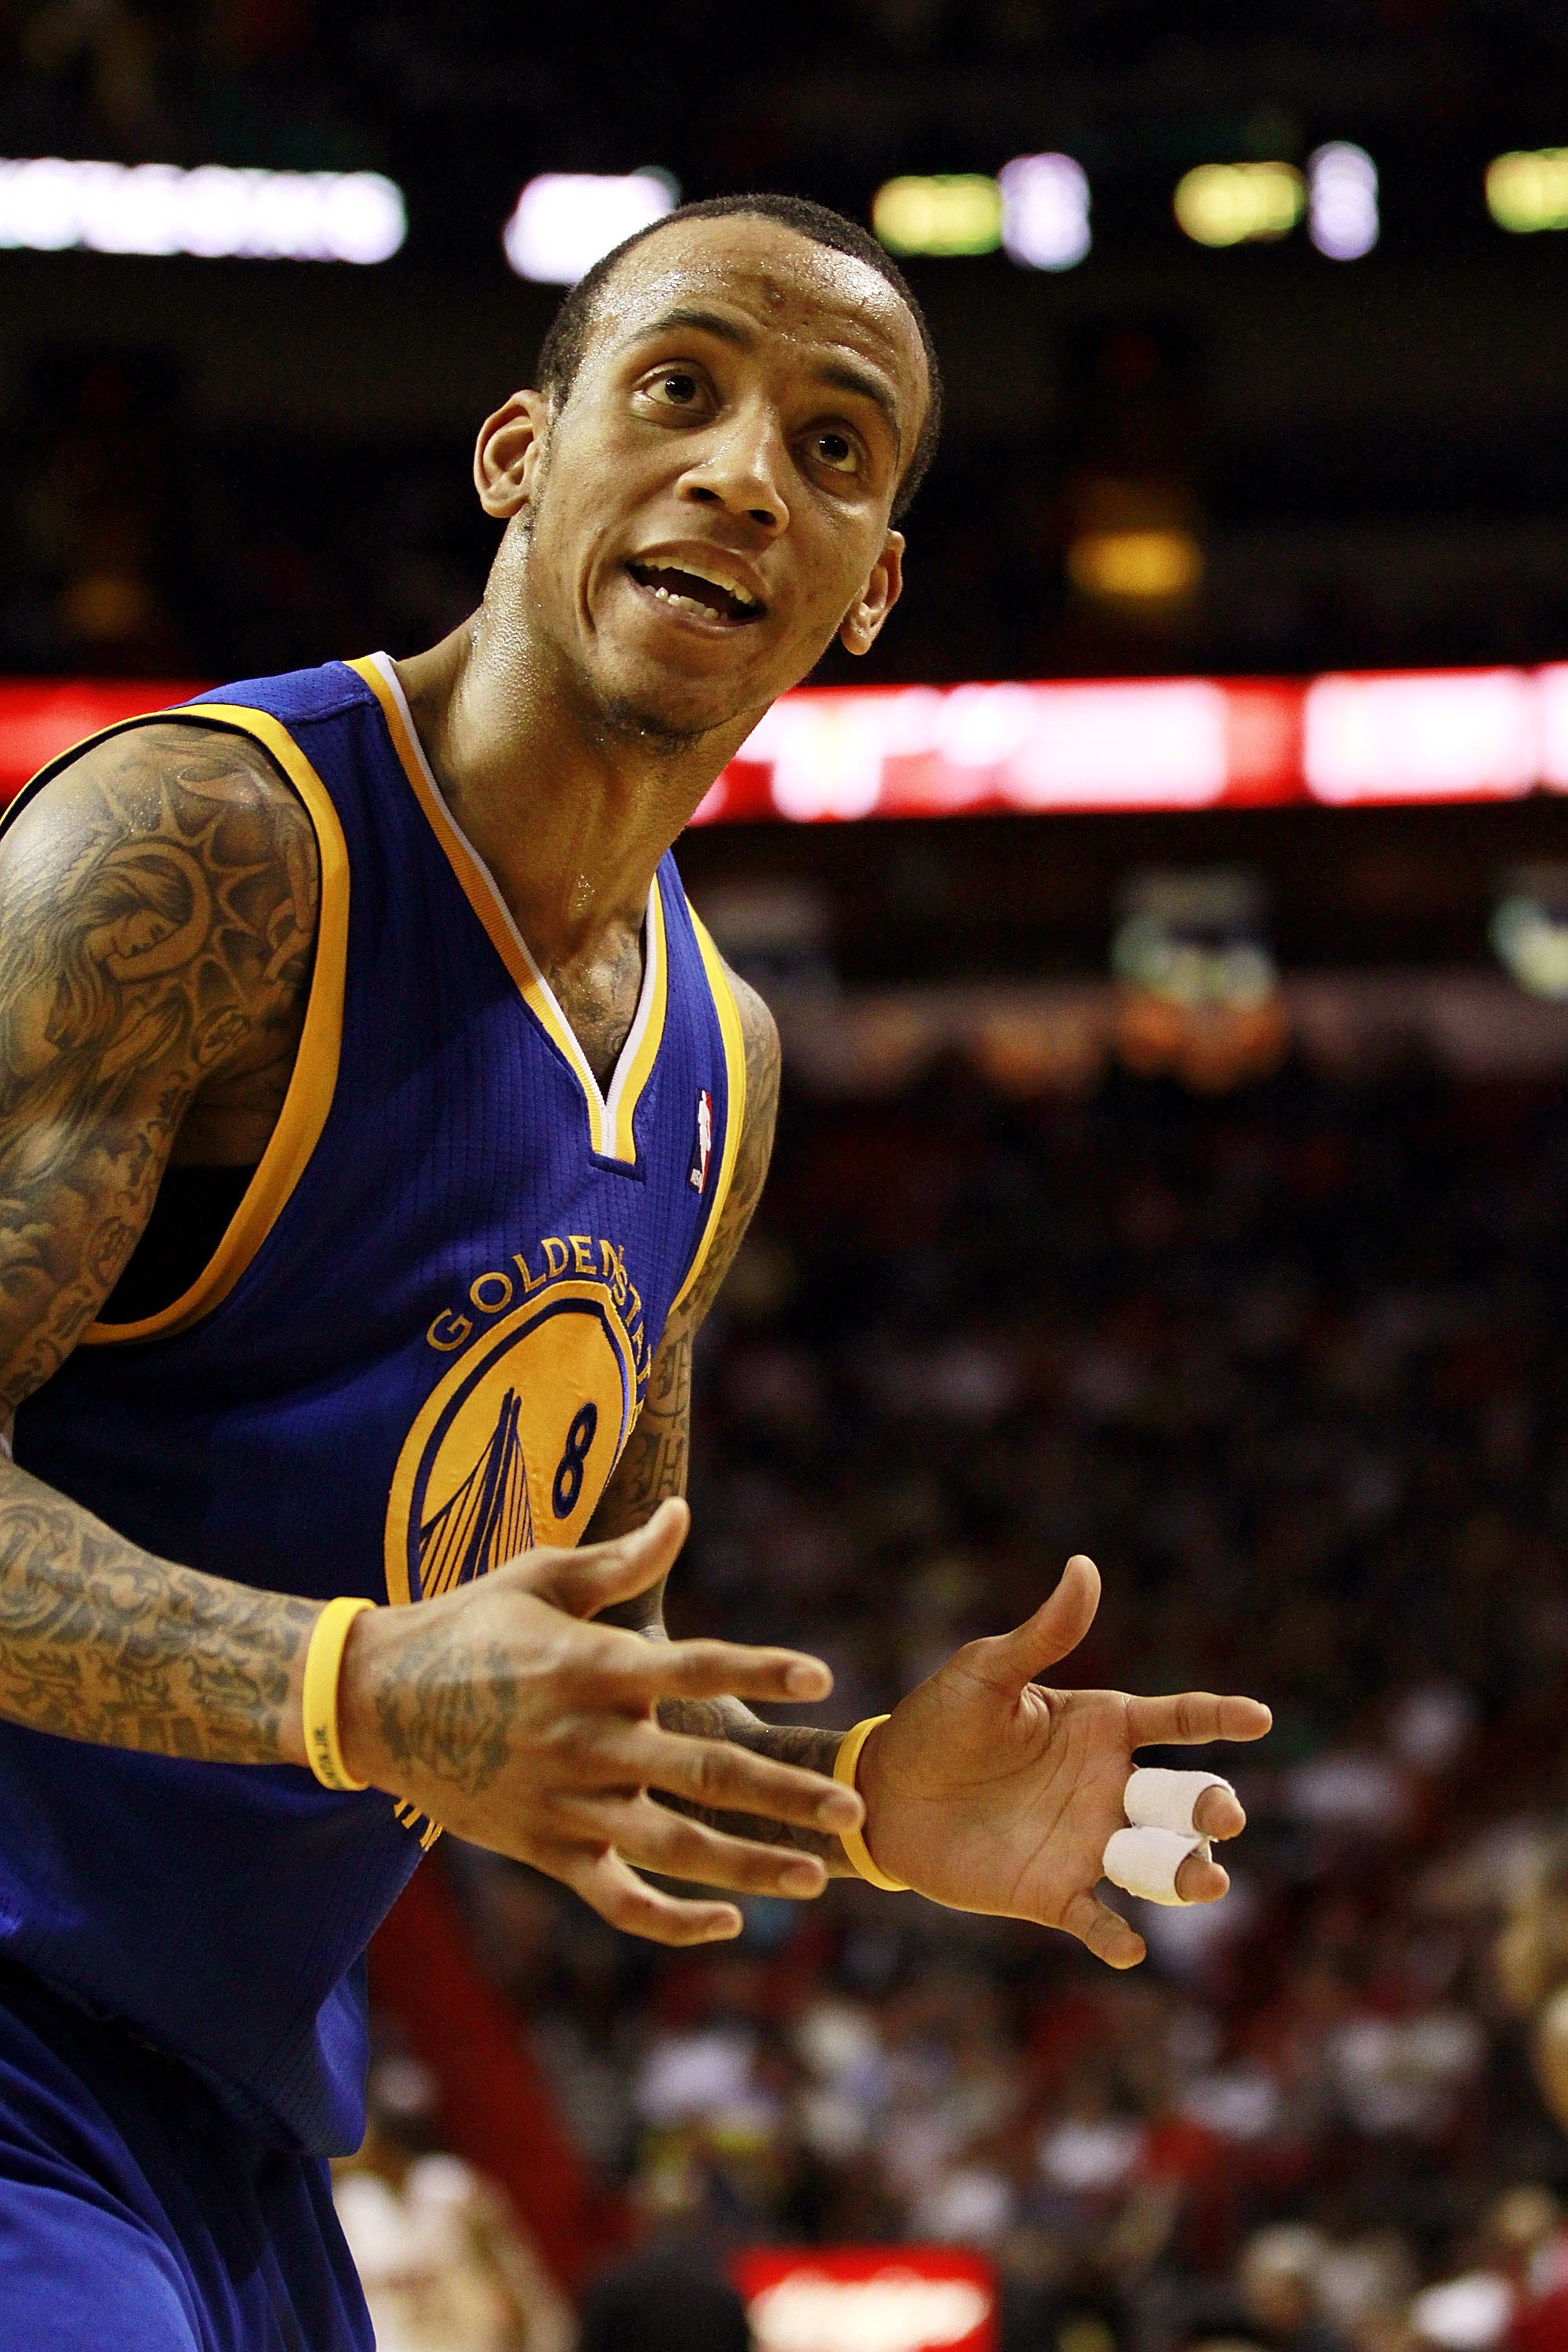 MIAMI, FL - JANUARY 01:  Guard Monta Ellis # 8 of the Golden State Warriors during a game against the Miami Heat at American Airlines Arena on January 1, 2011 in Miami, Florida.  NOTE TO USER: User expressly acknowledges and agrees that, by downloading an